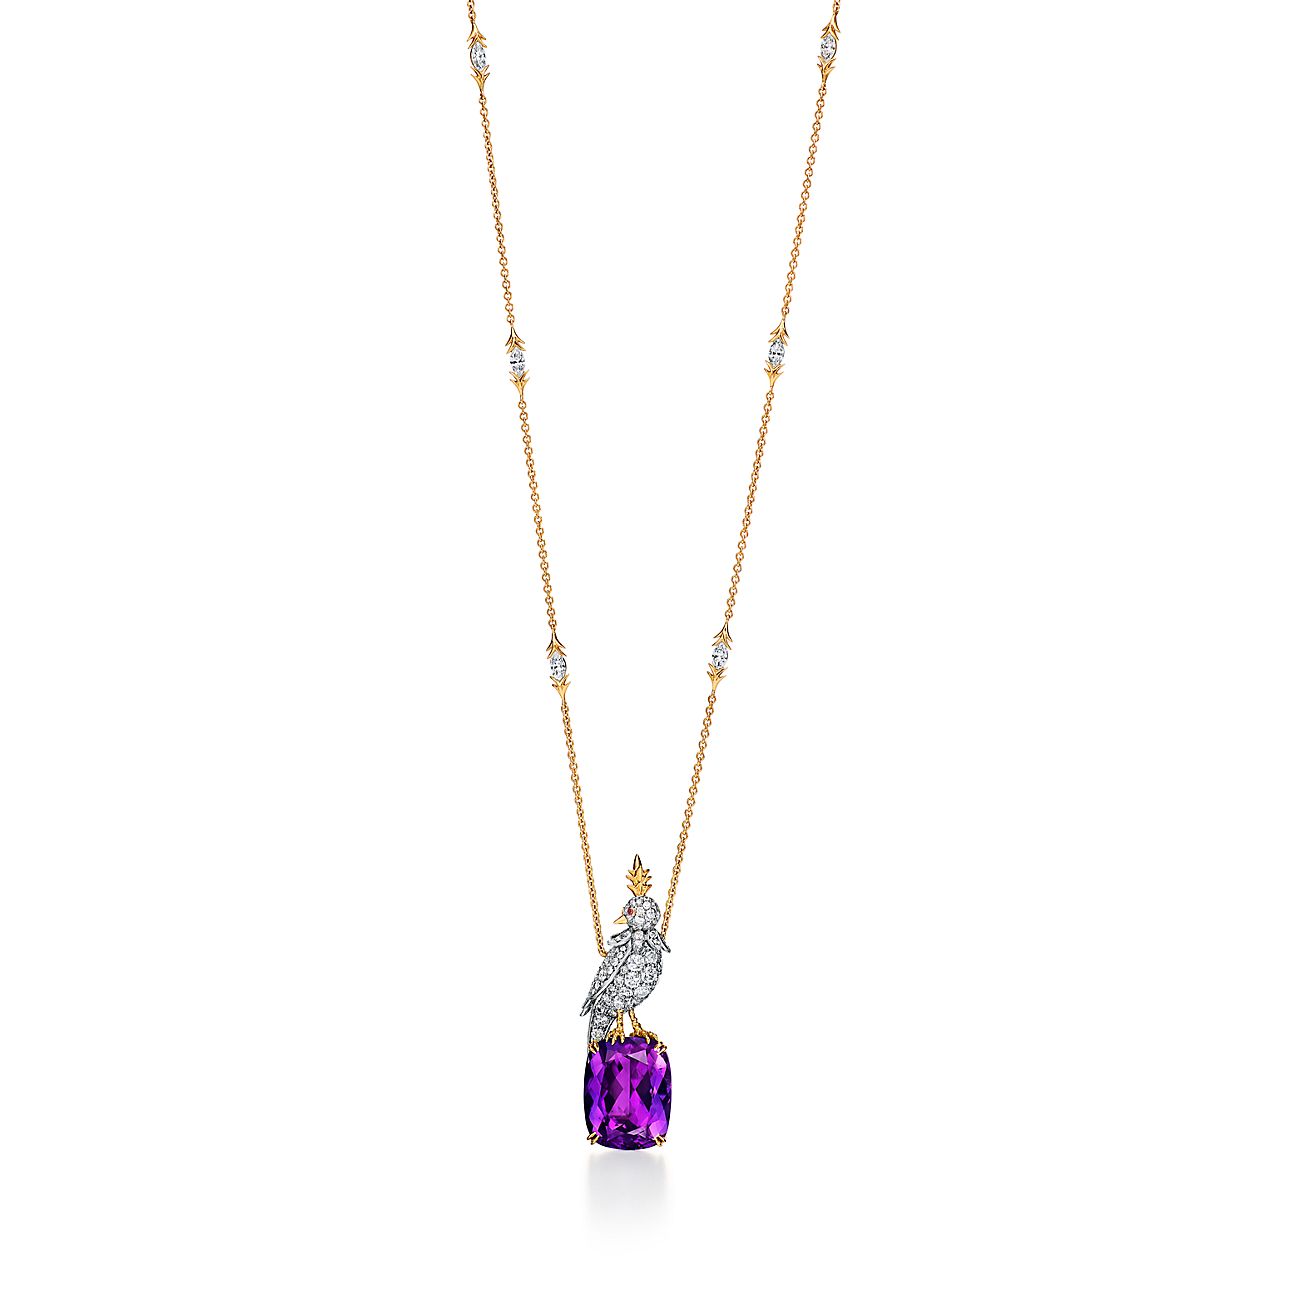 Pendant in Gold and Platinum with an Amethyst, Diamonds and Pink Sapphires